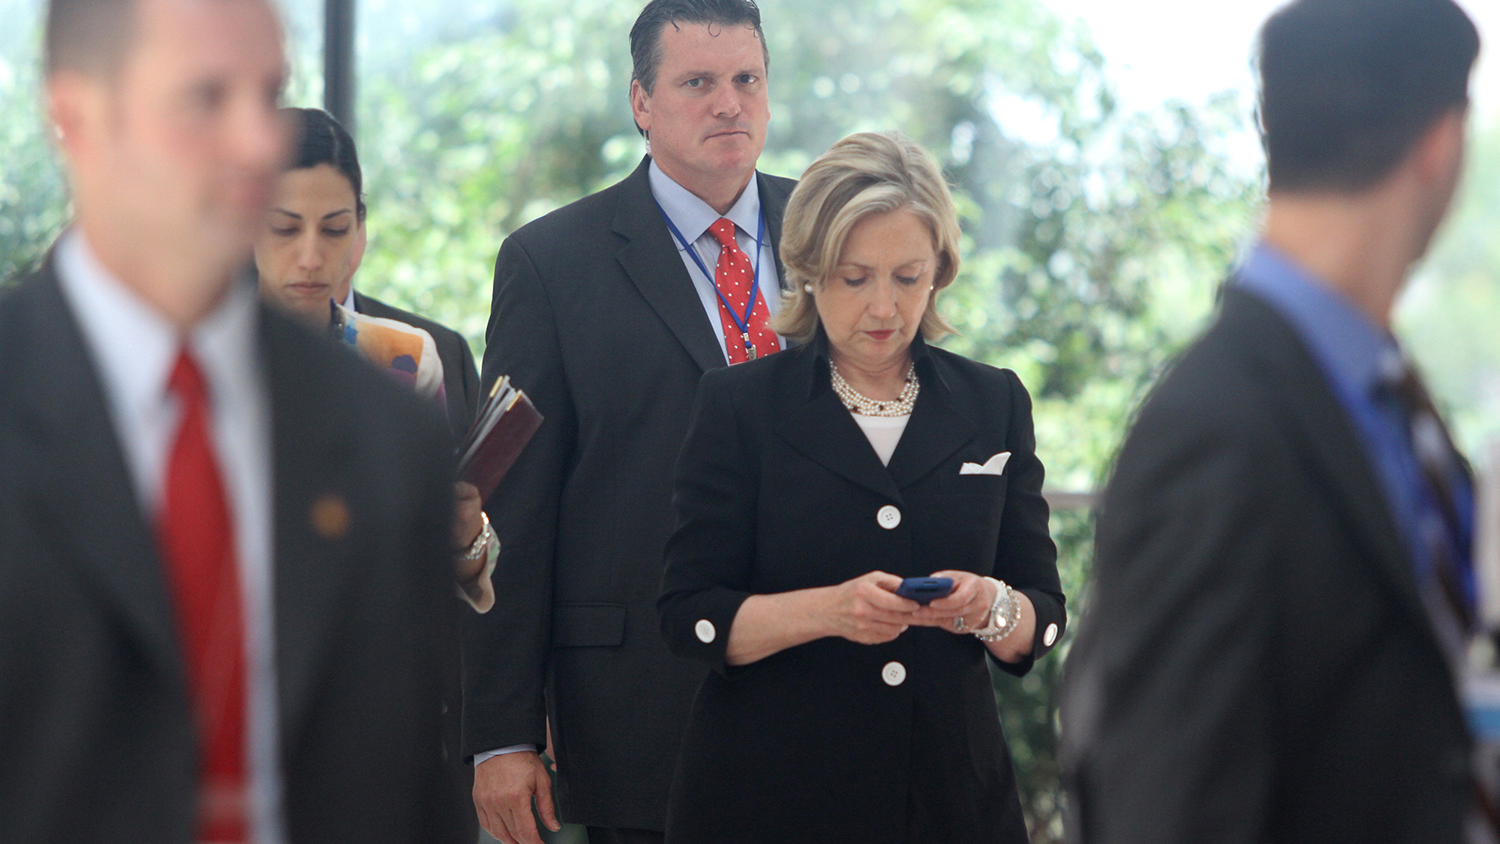 Secretary of State Hillary Clinton looks at her mobile phone after attending a Russia-U.S. meeting on the sidelines of the 43rd annual Association of South East Asian Nations (ASEAN) meeting in Hanoi on July 23, 2010.
